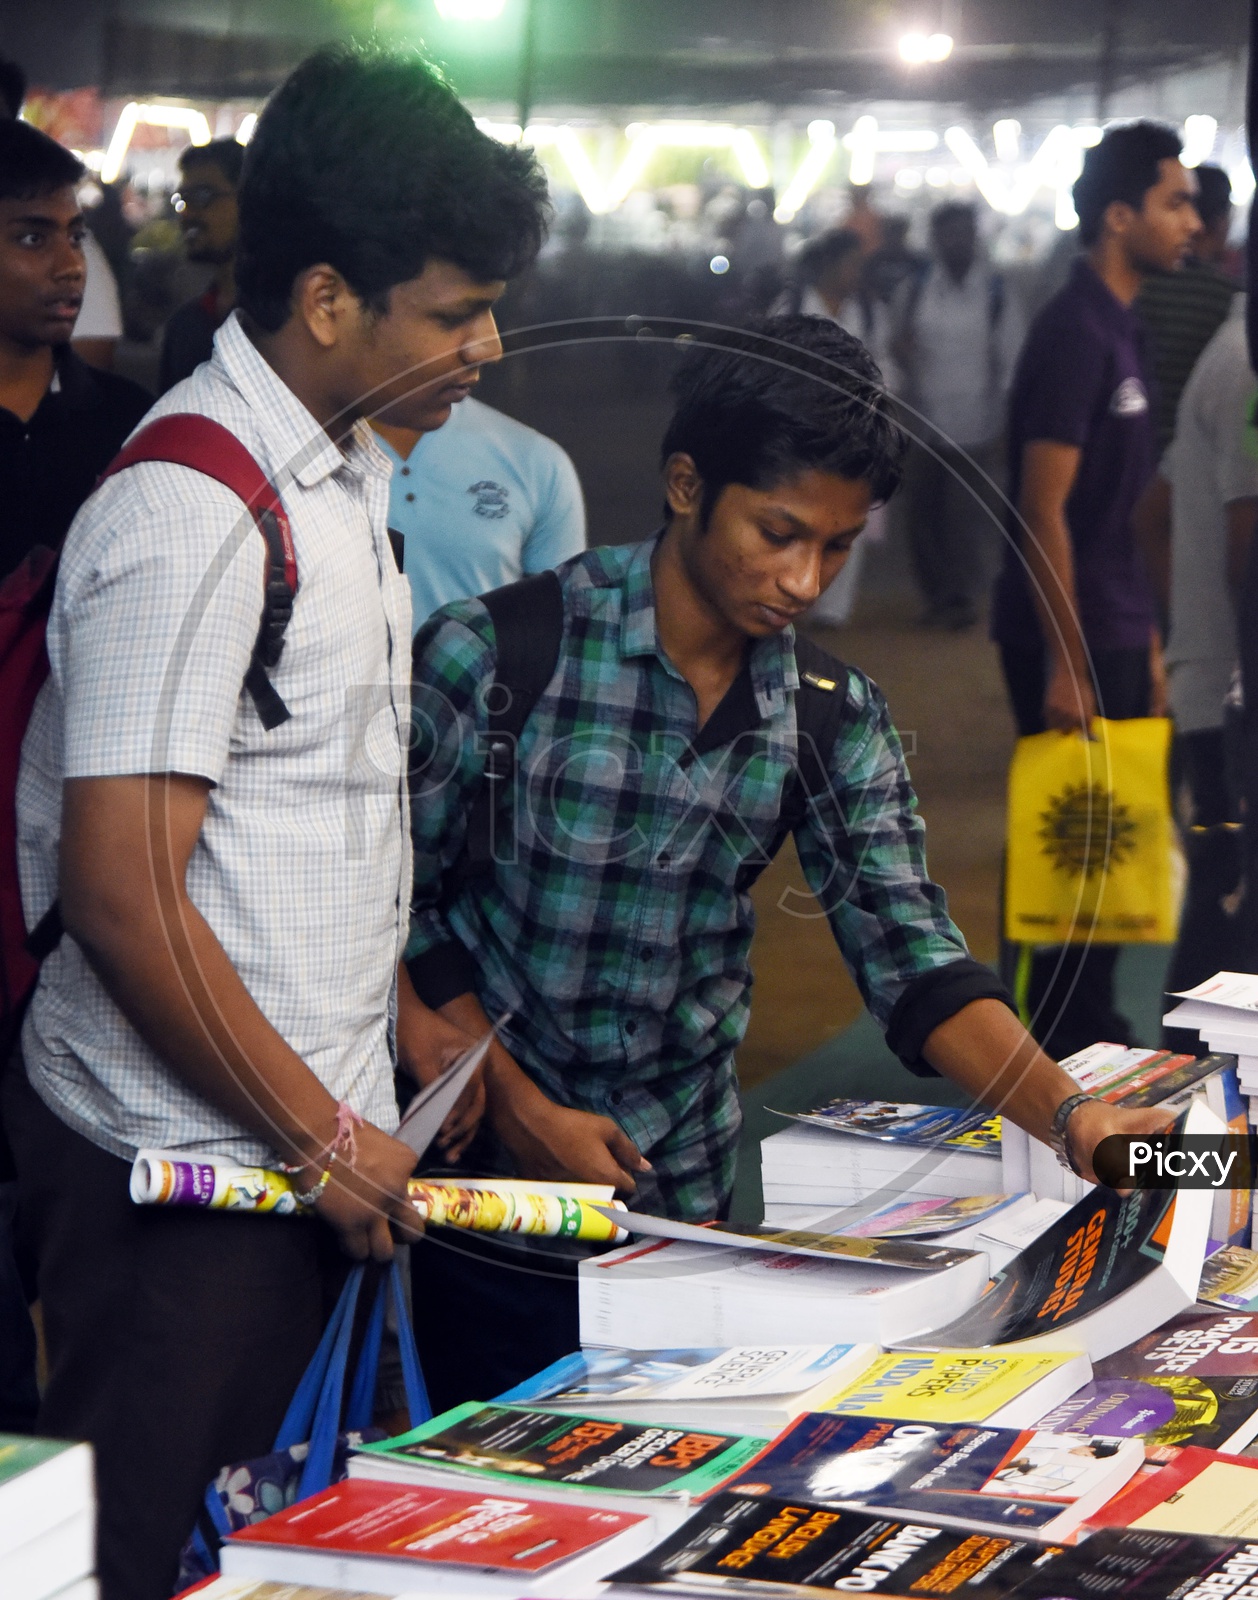 Students checking out the books at a stall